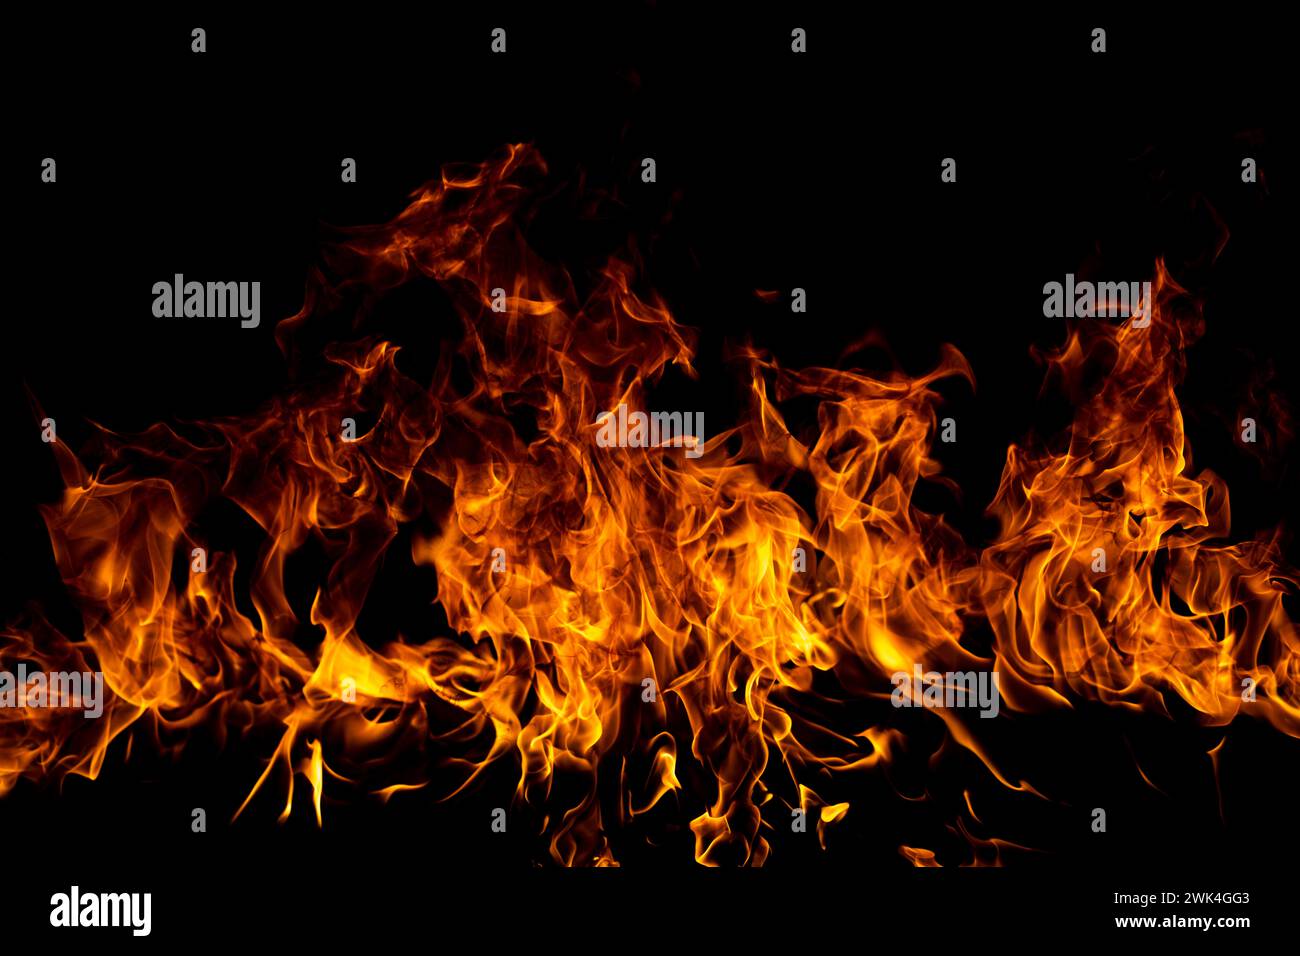 Blaze fire flame texture for banner background. Stock Photo